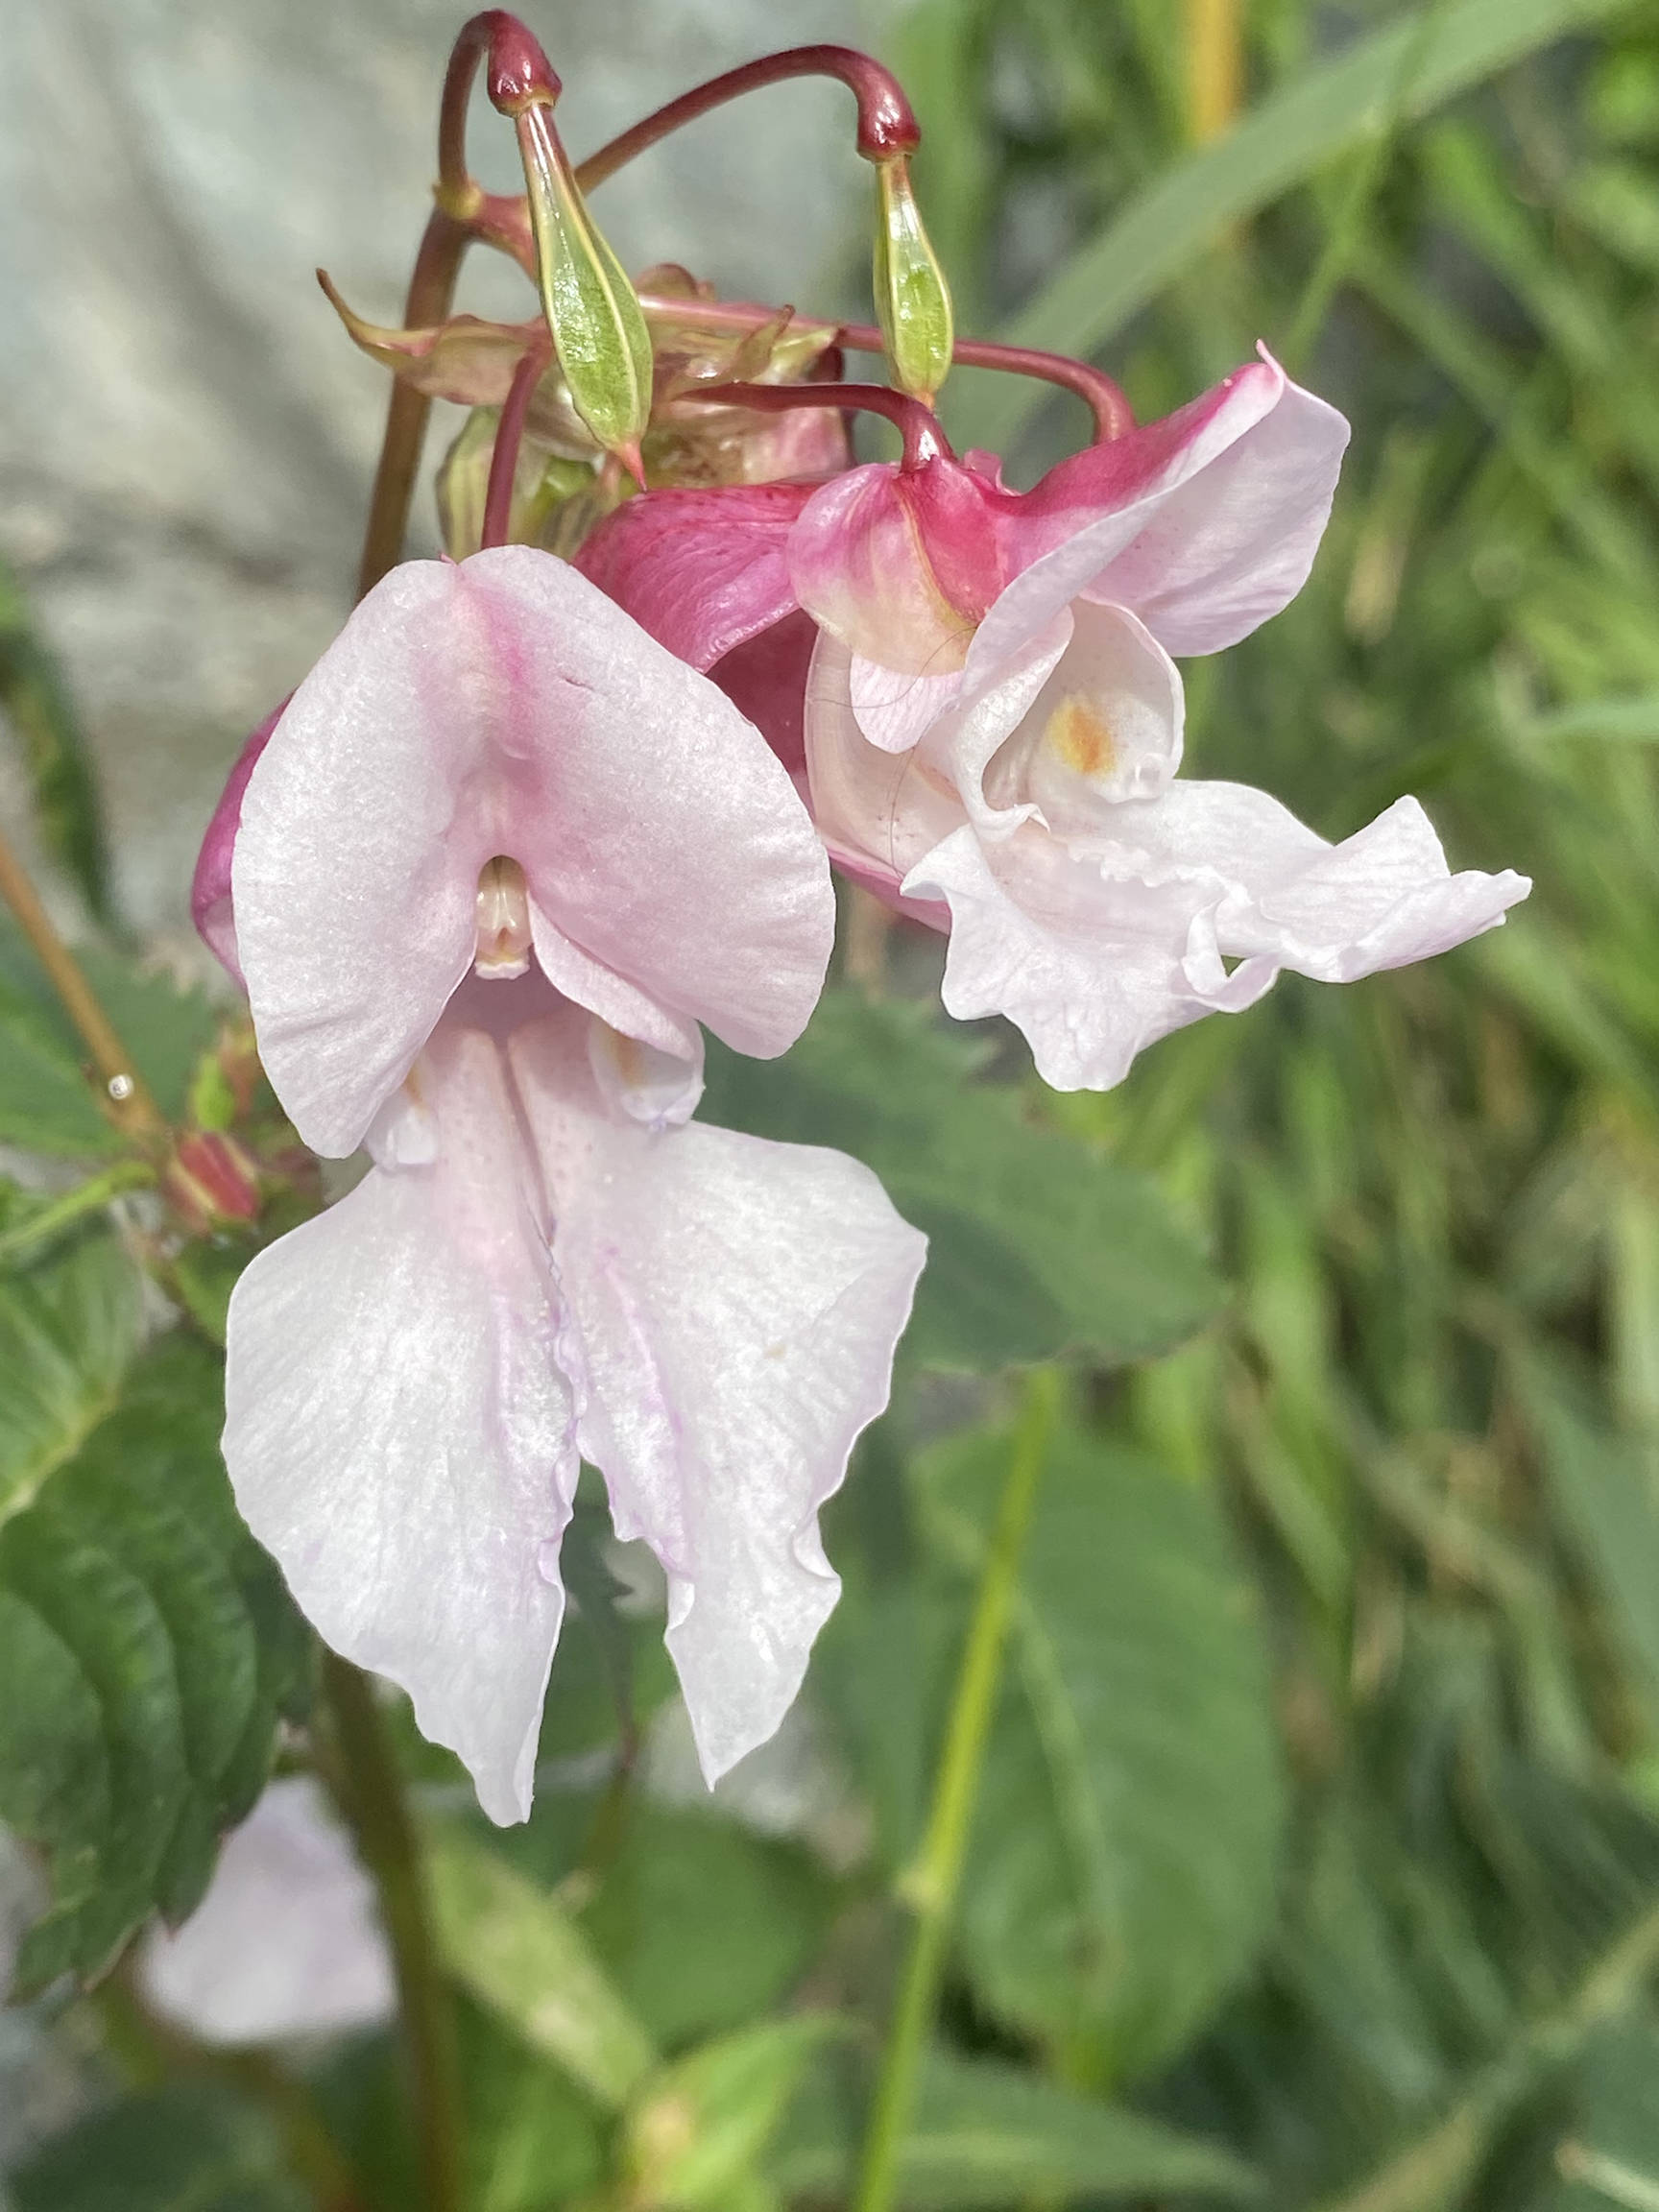 This photo shows invasive plant ornamental jewelweed (Impatiens glandulifera Royle) on the trail near the end of Industrial Boulevard on Aug. 29, 2020. (Courtesy Photo / Michael Stekoll)